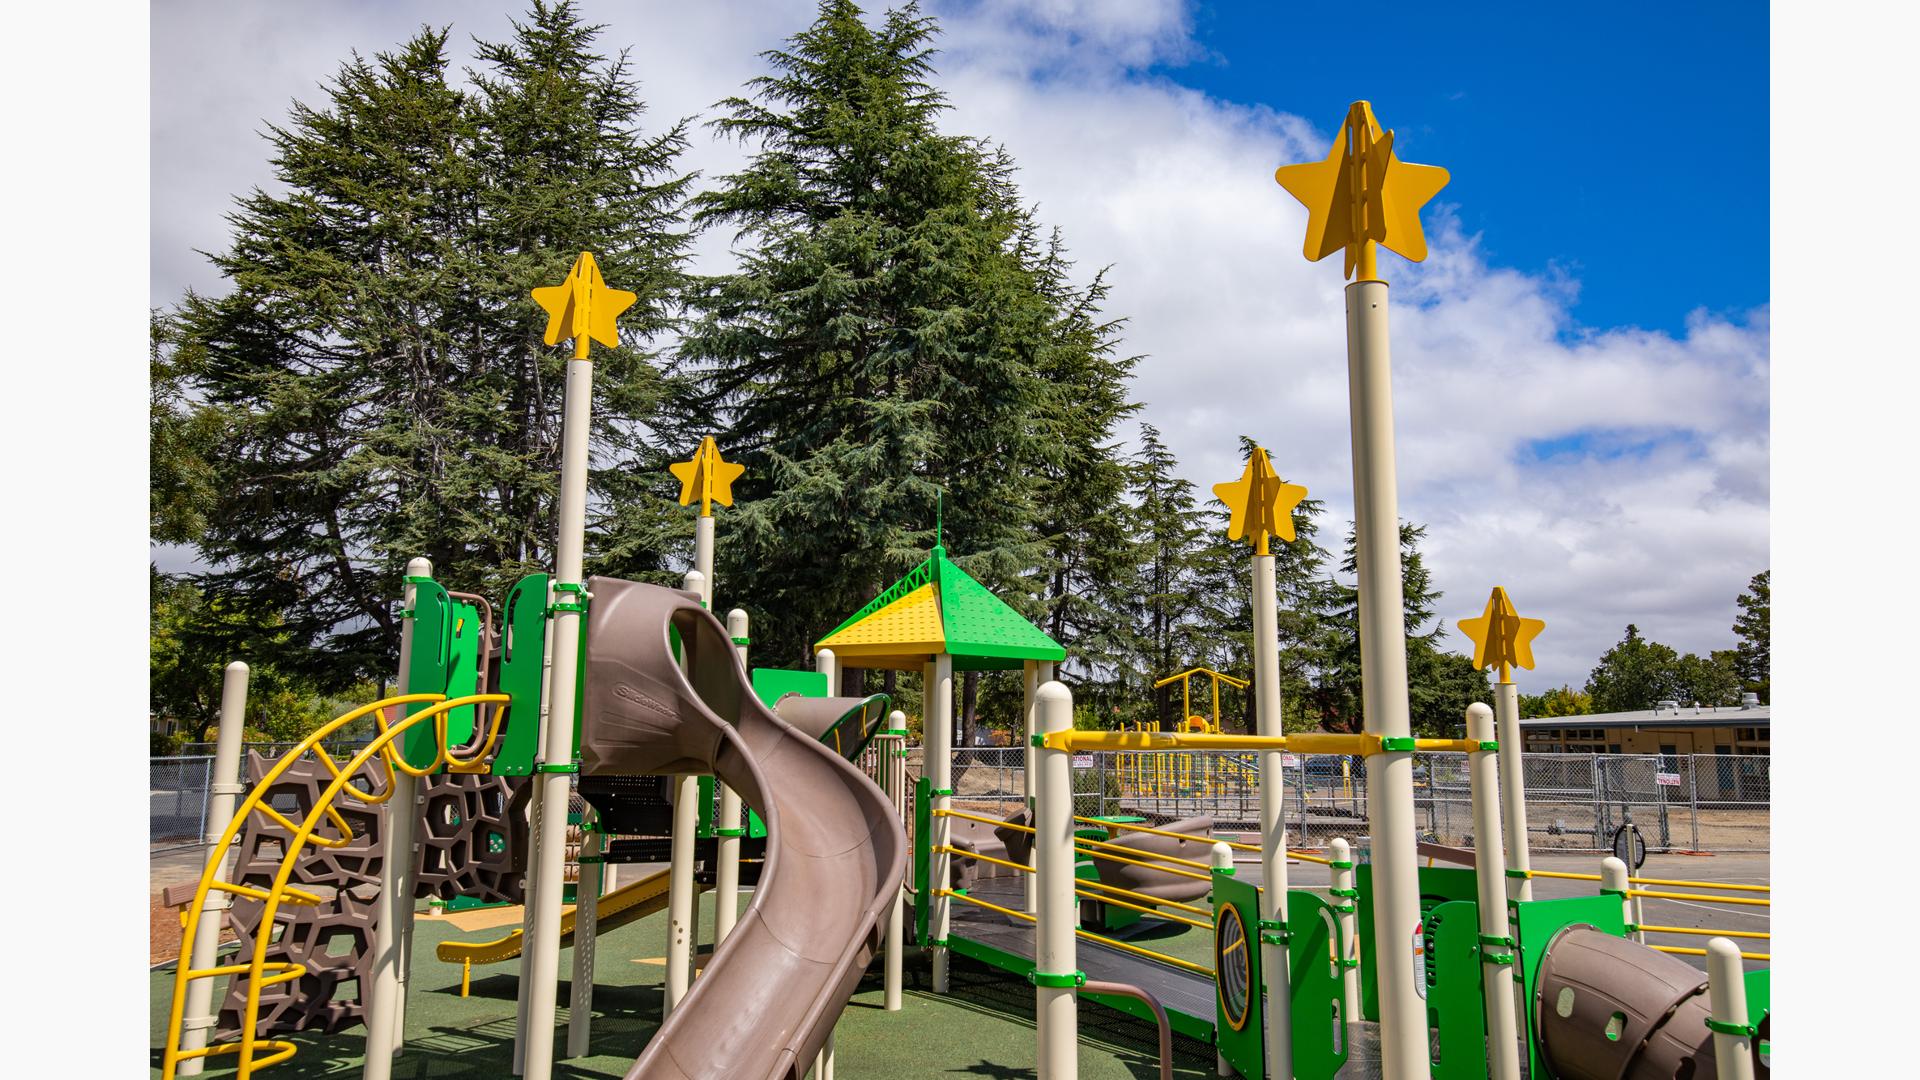 Ponderosa Elementary playground - view of slides and ramps